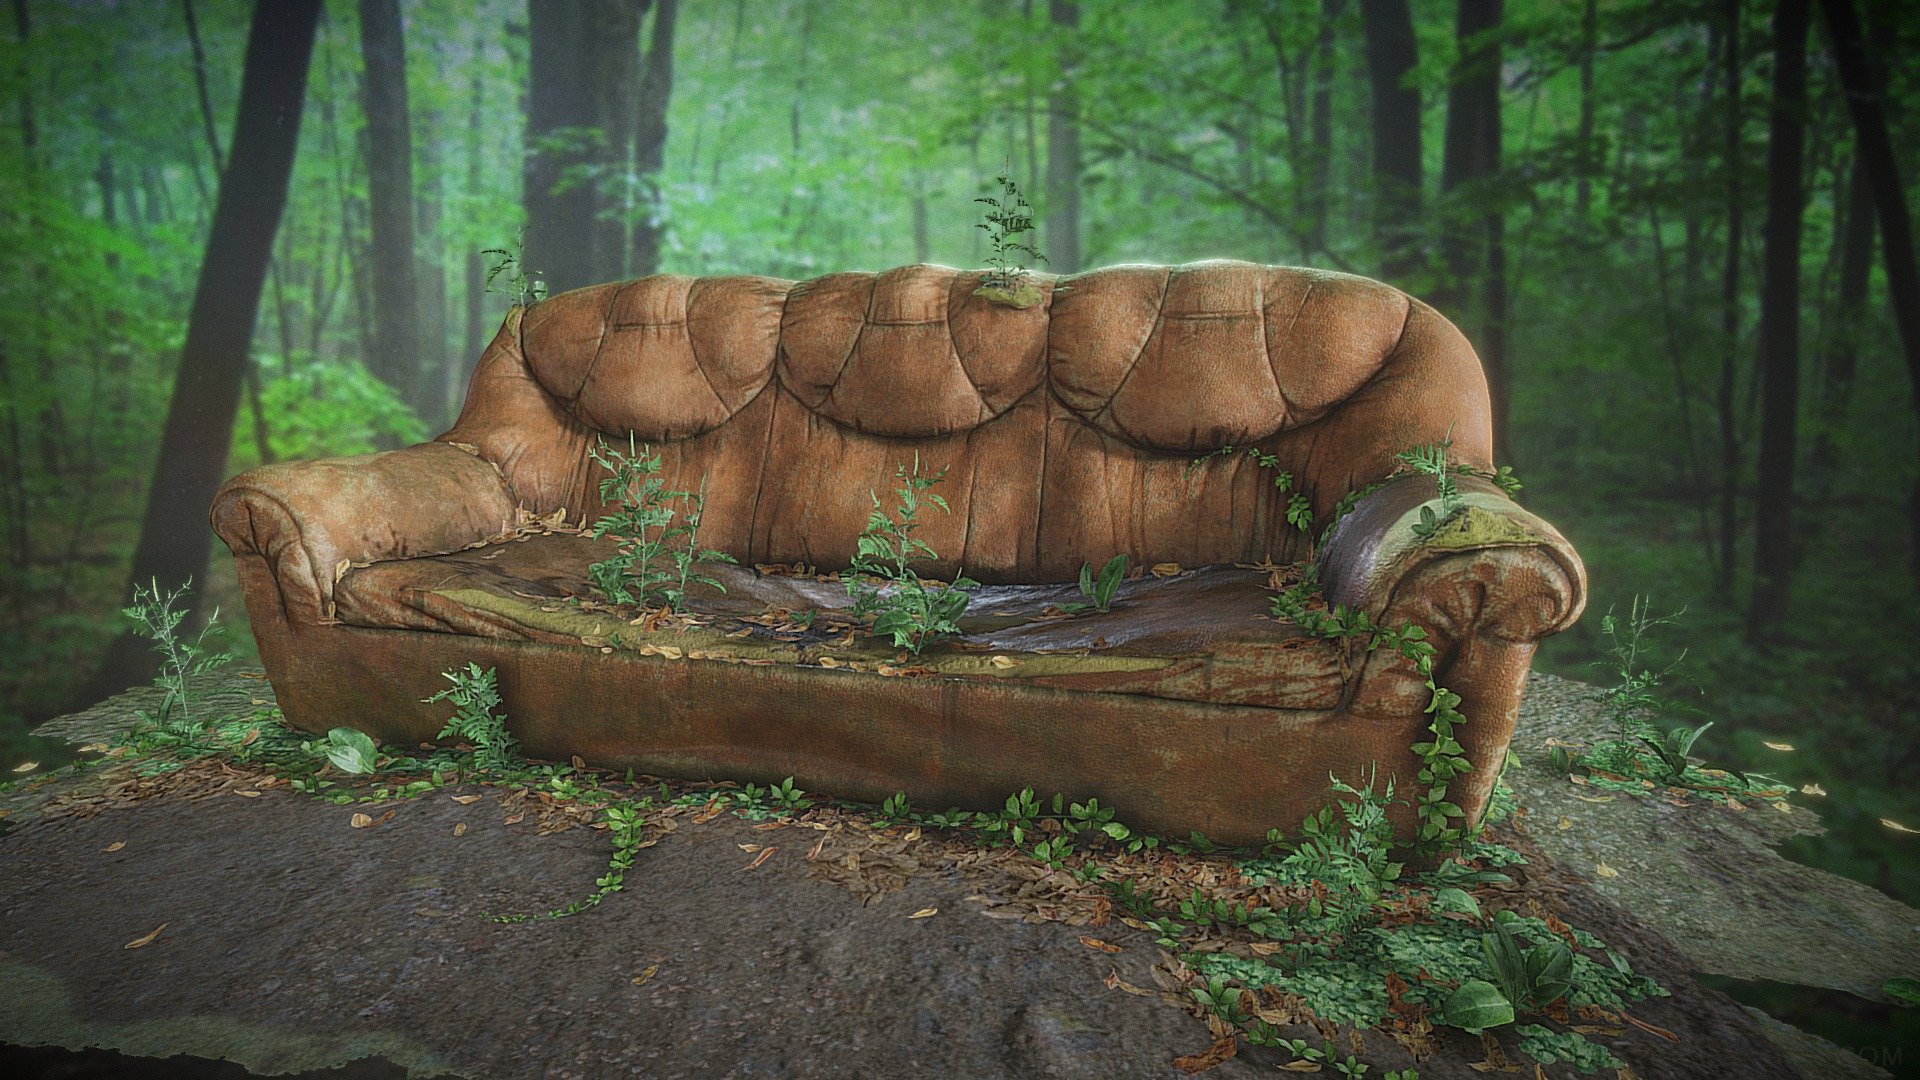 In a world where post-apocalyptic games and movies are around every corner, I decided to create a game prop that'd fit into such a setting. I give you the &lsquo;Forgotten Sofa'. Low poly game asset modeled in 3ds Max, sculpted in zbrush, painted in Mudbox, Photoshop and Substance Painter, and rendered in Marmoset toolbag 3d model